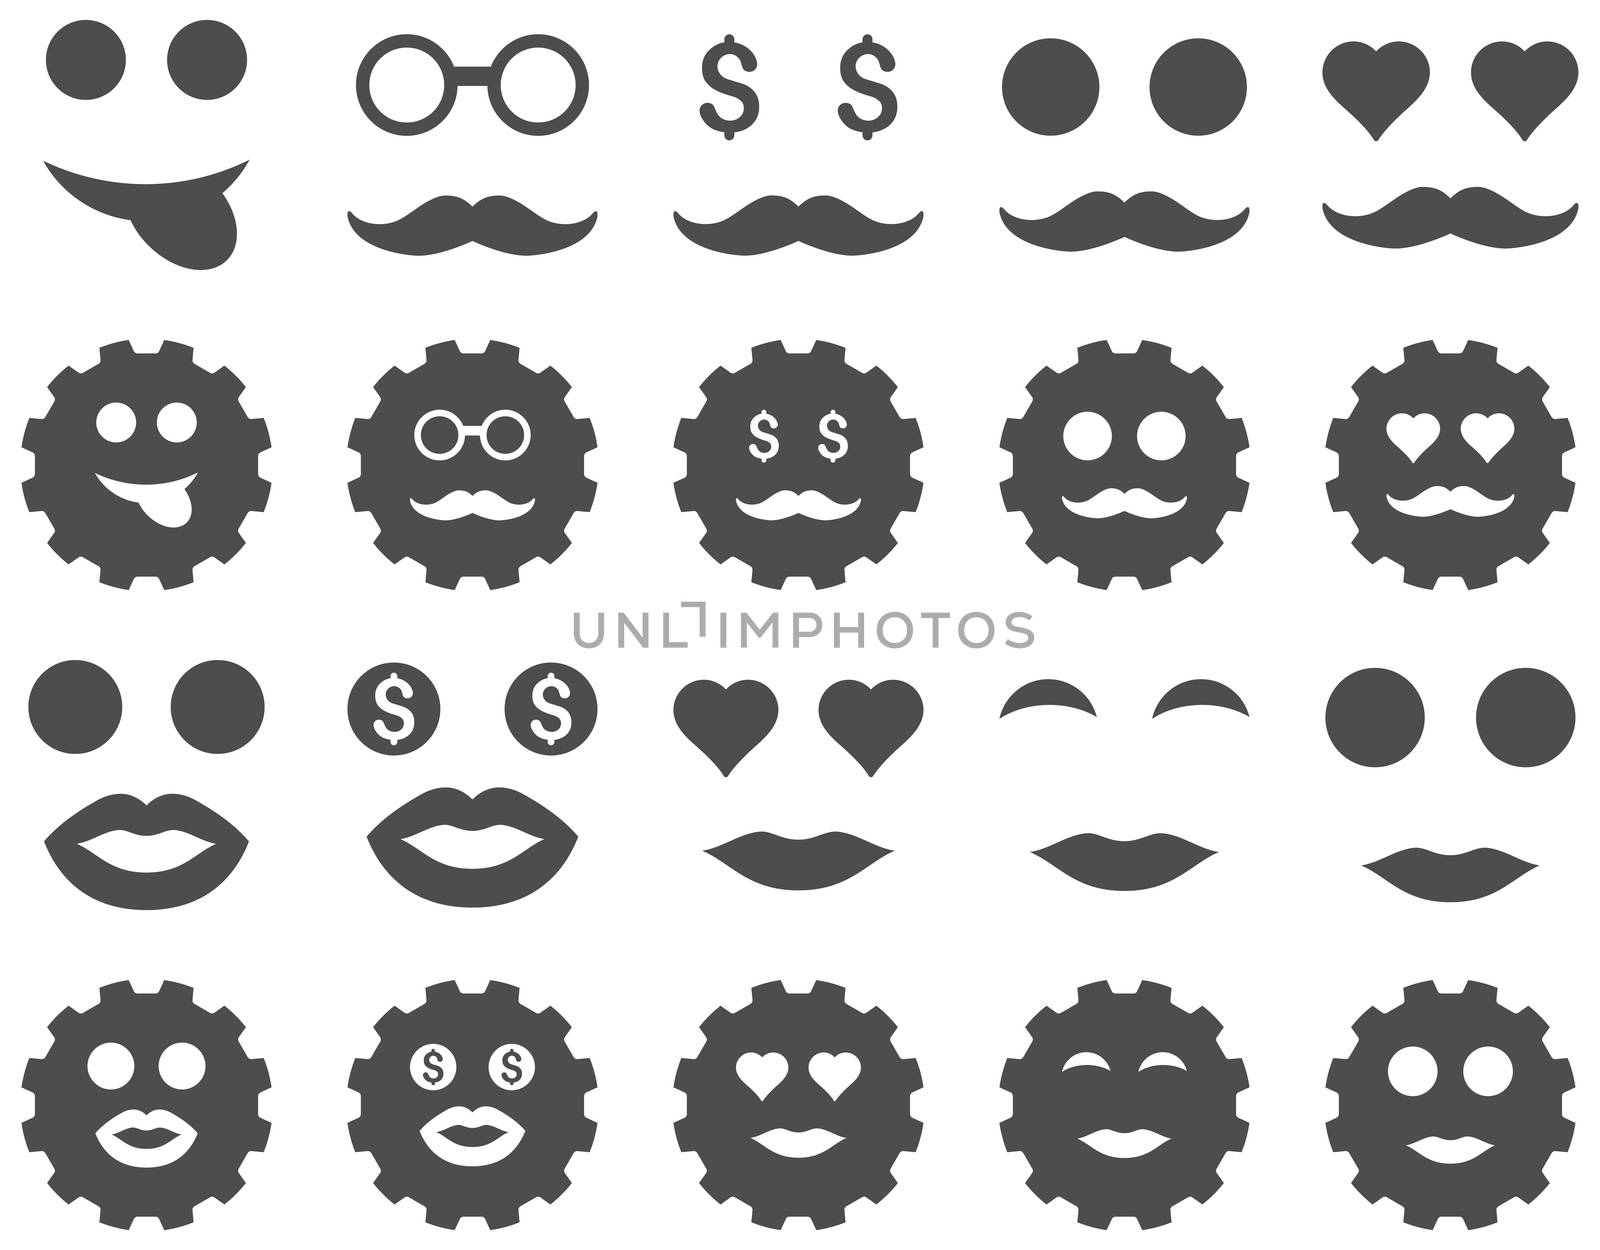 Gear and emotion icons by ahasoft